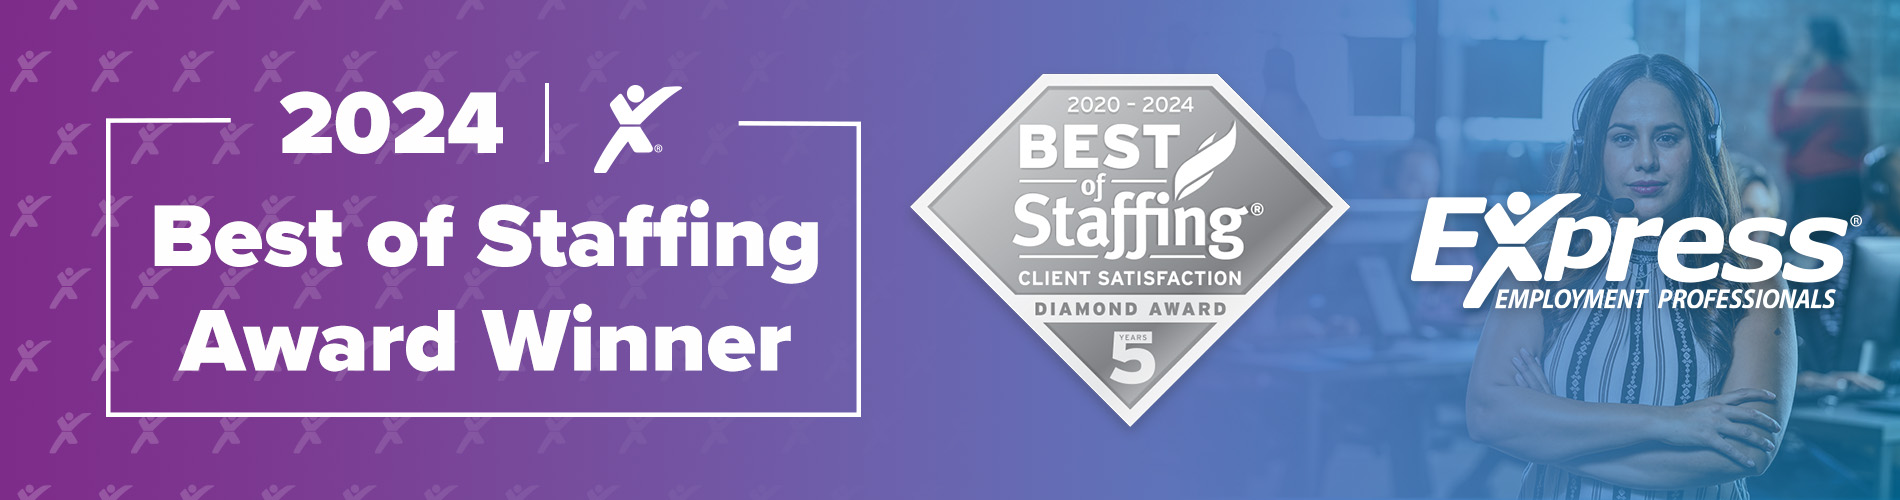 Best-of-Staffing-Client-Award-Home-Banner-2024-EEP